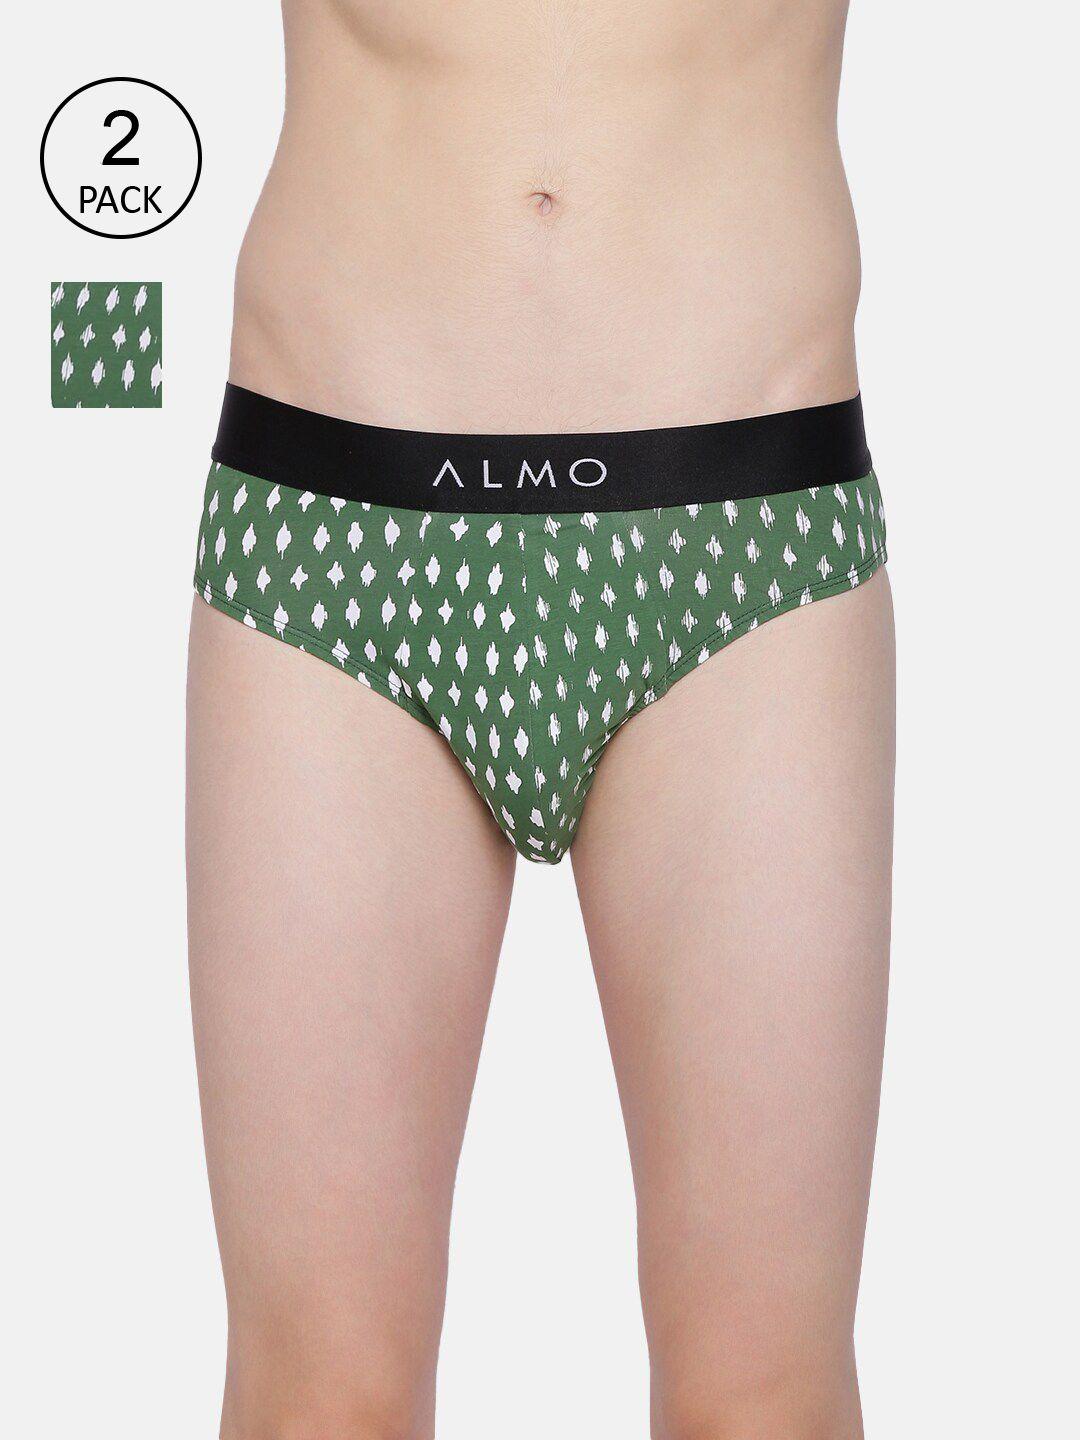 almo-wear-men-pack-of-2-green-&-white-printed-organic-cotton-basic-briefs